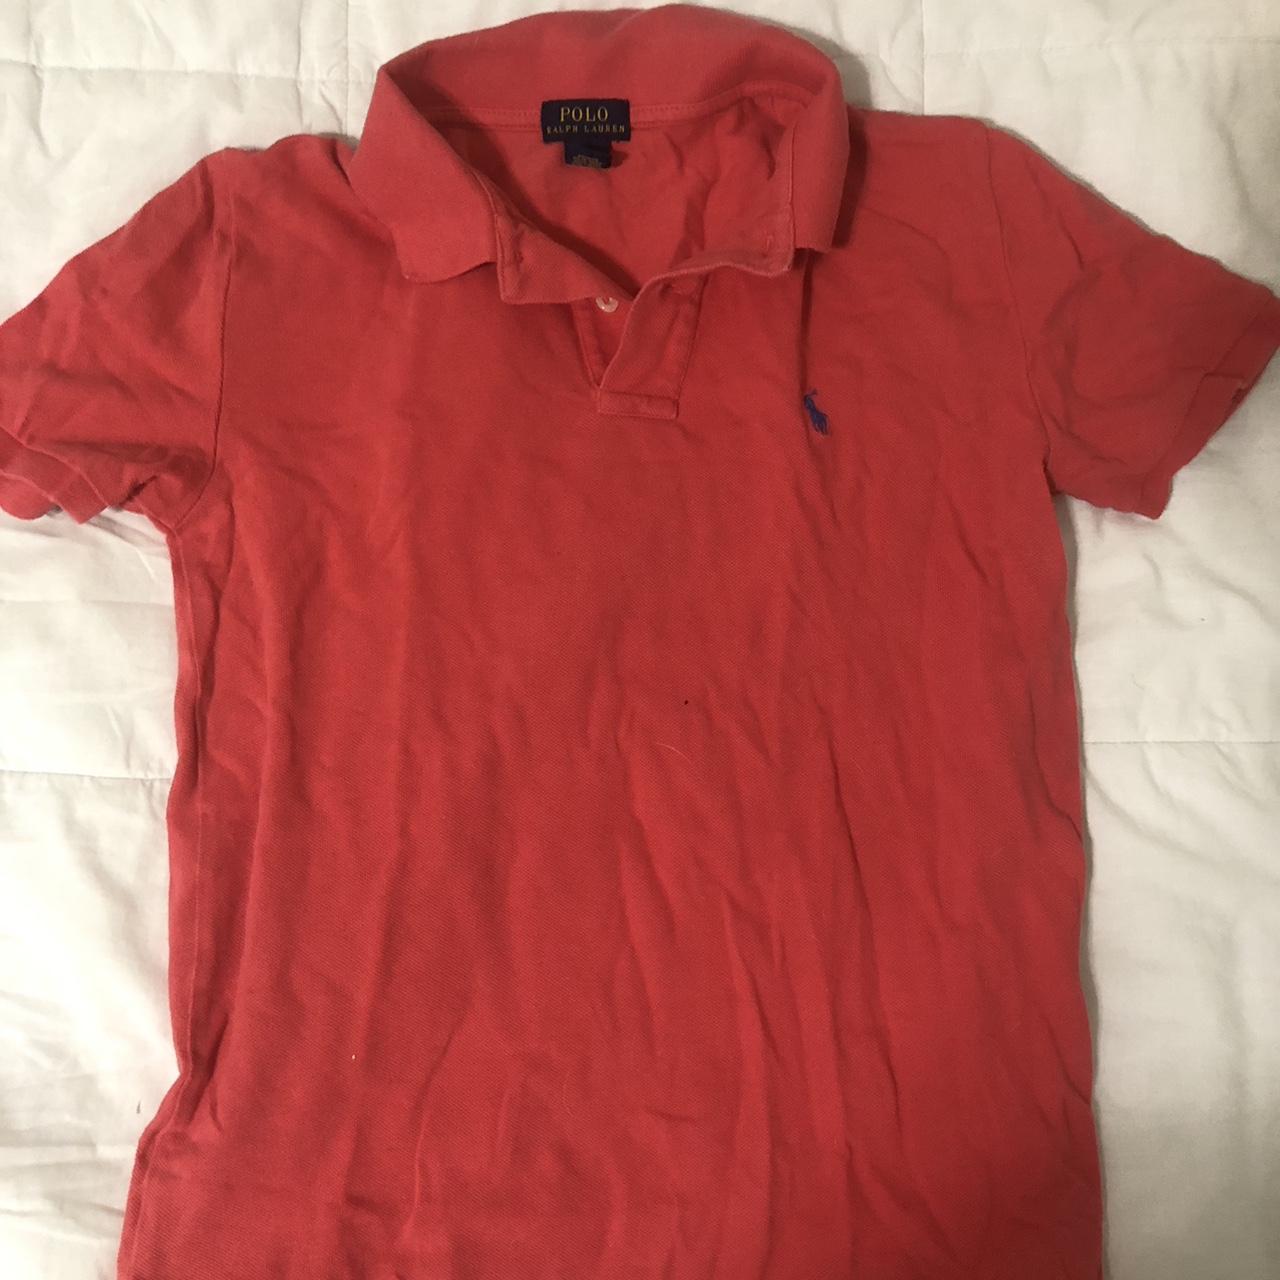 polo bright red collared shirt - Depop